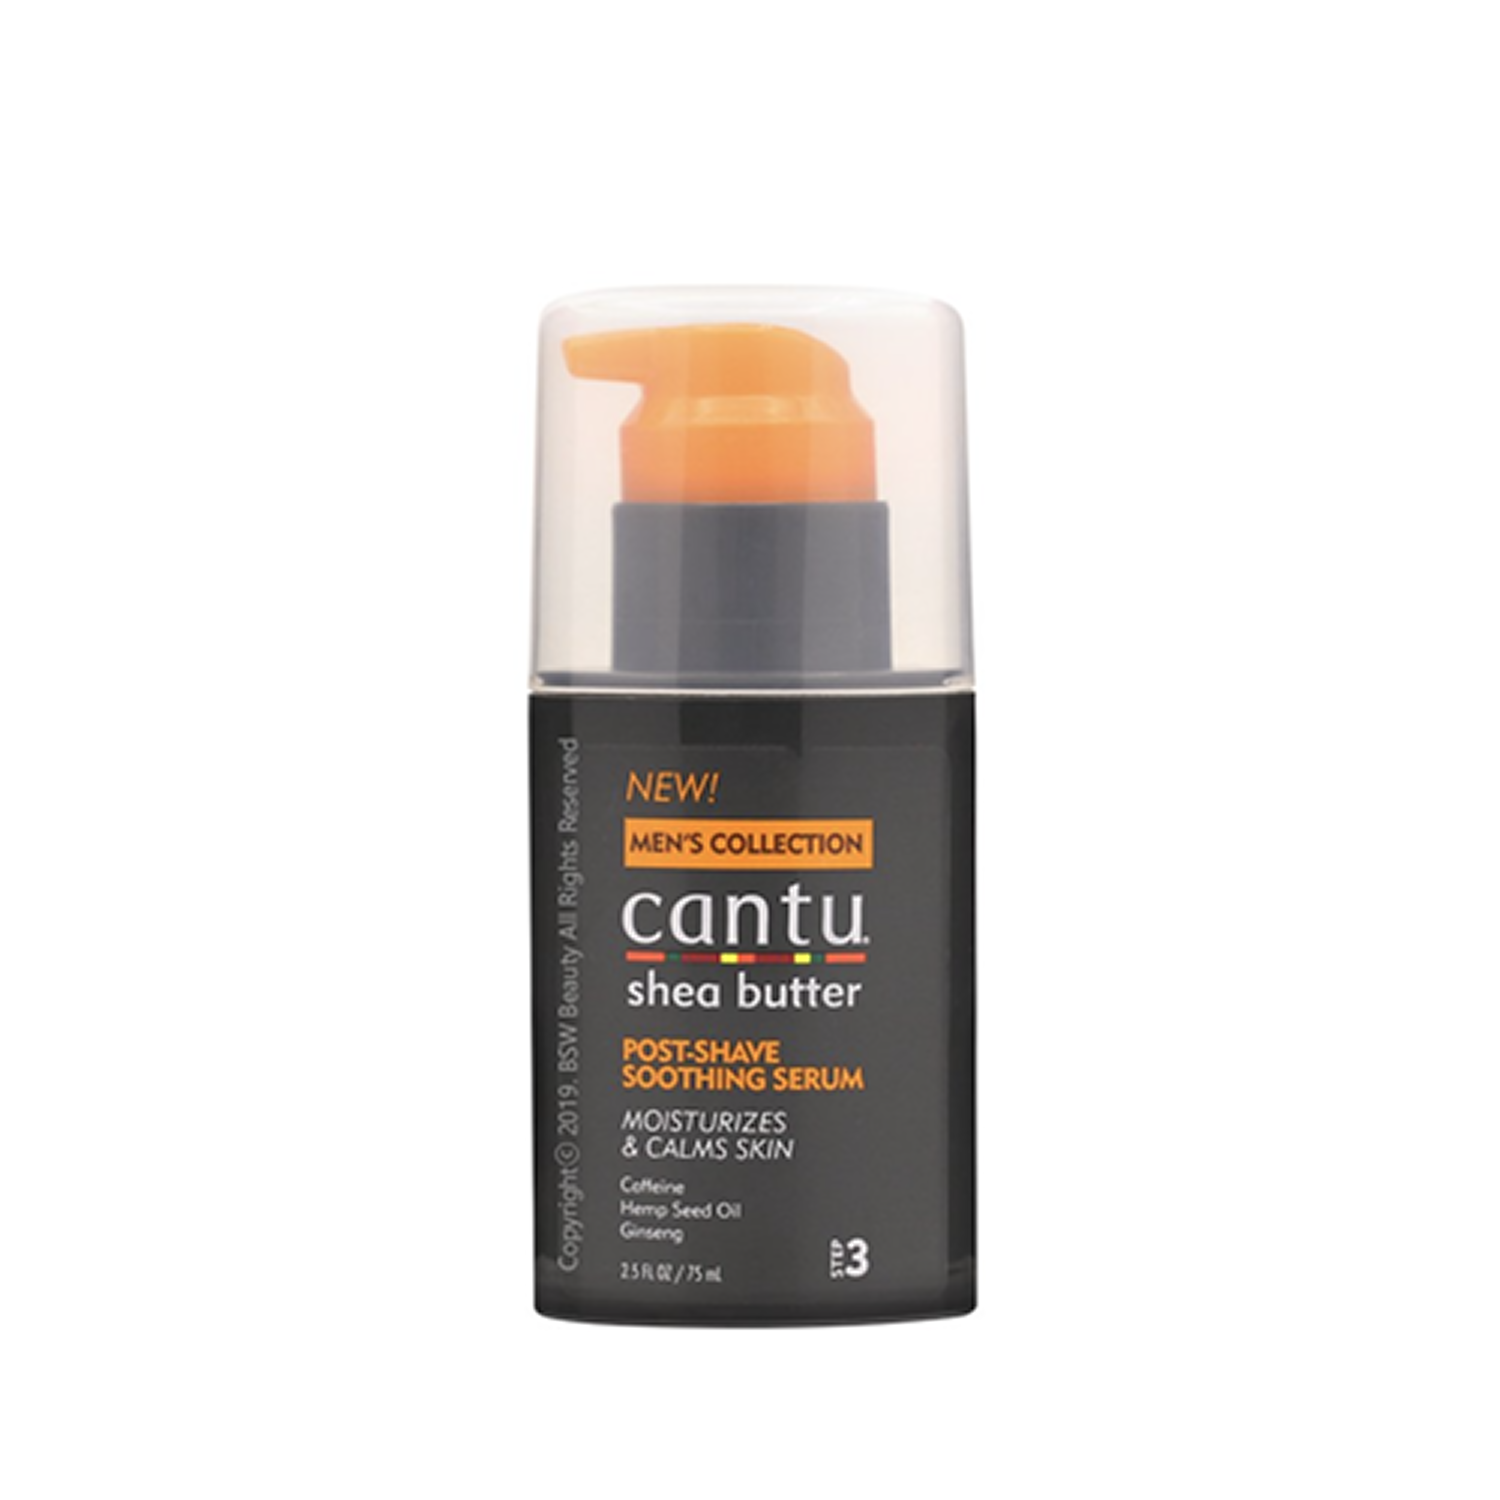 Cantu Men's Collection Post Shave Soothing Serum 75ml (2.5oz) - Afroquarter 